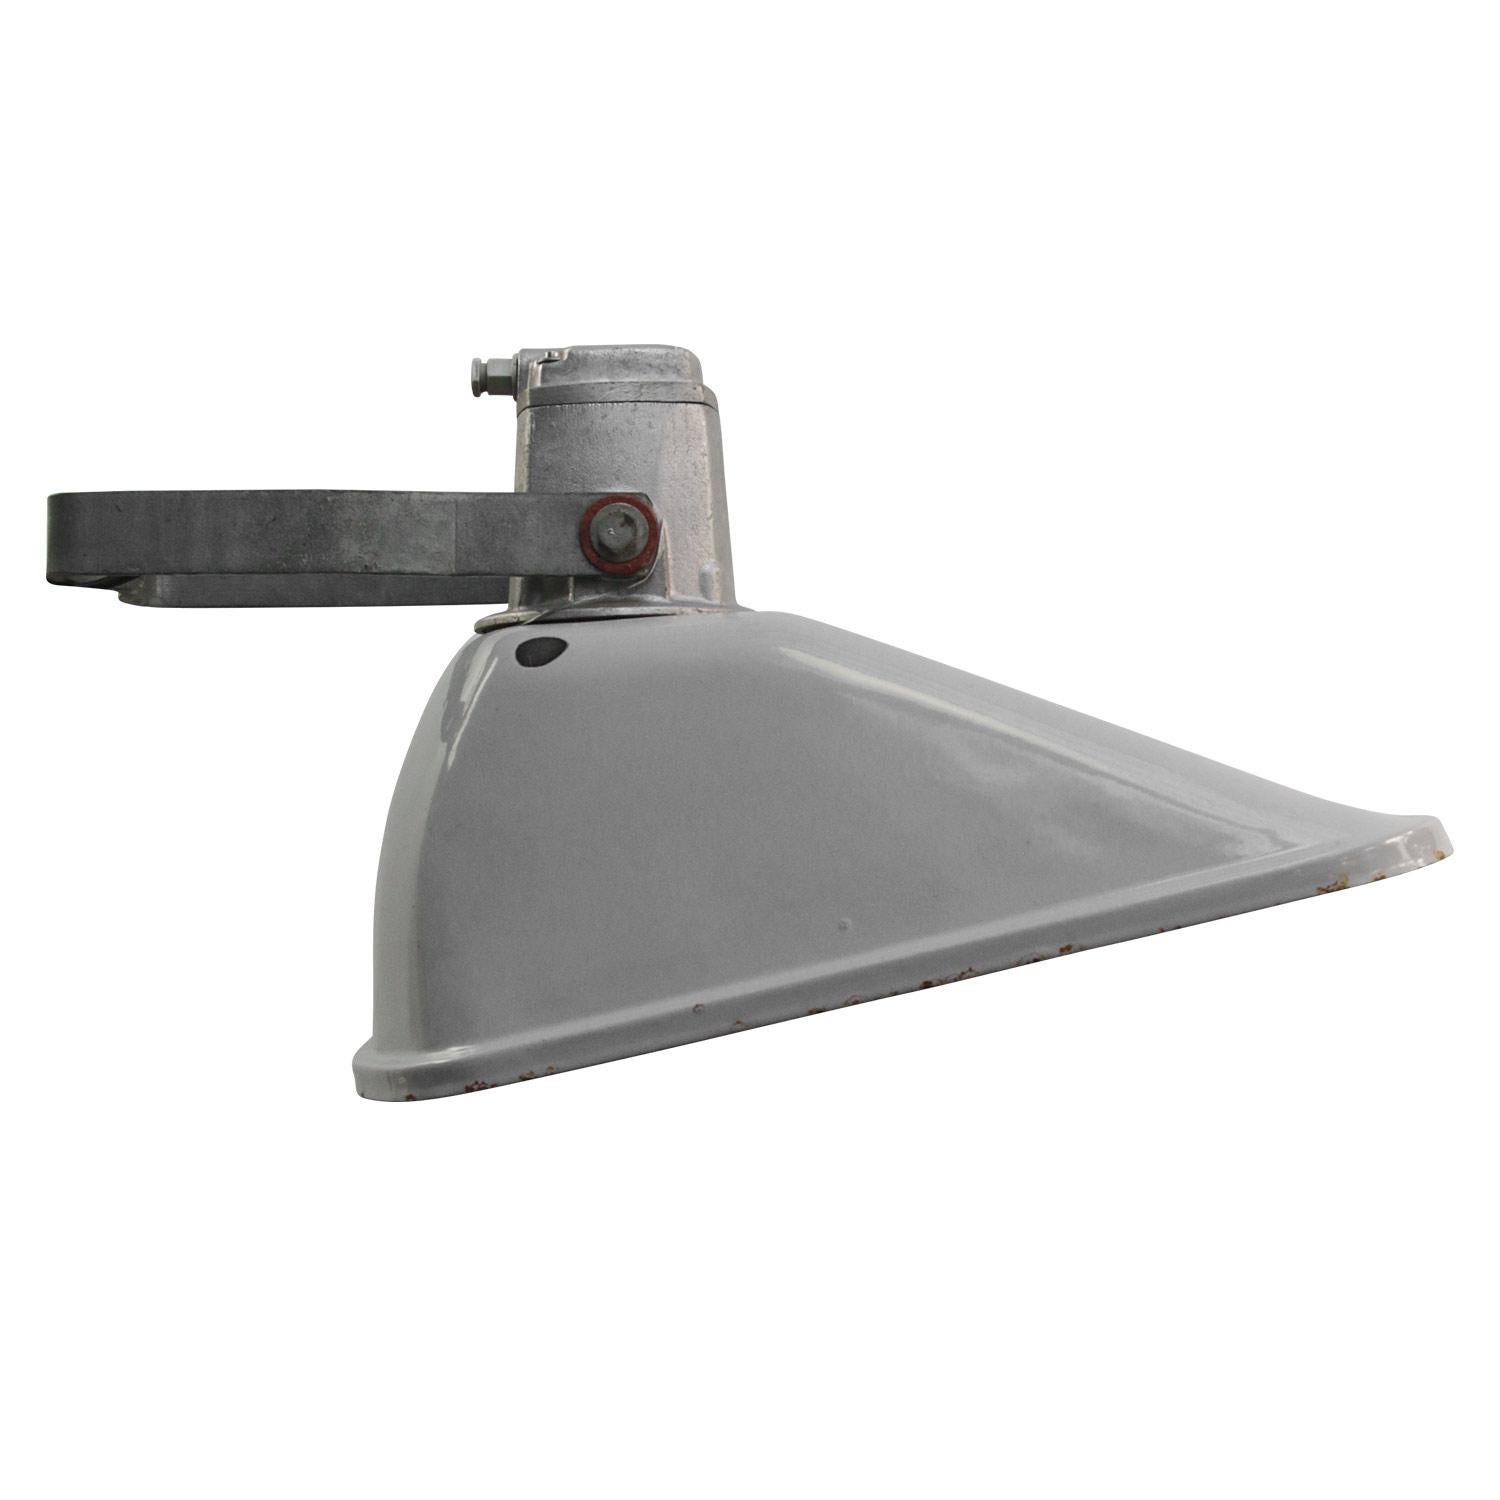 Gas station wall light. Benjamin US
adjustable in angle
gray enamel, white interior

Weight: 4.70 kg / 10.4 lb

Priced per individual item. All lamps have been made suitable by international standards for incandescent light bulbs,